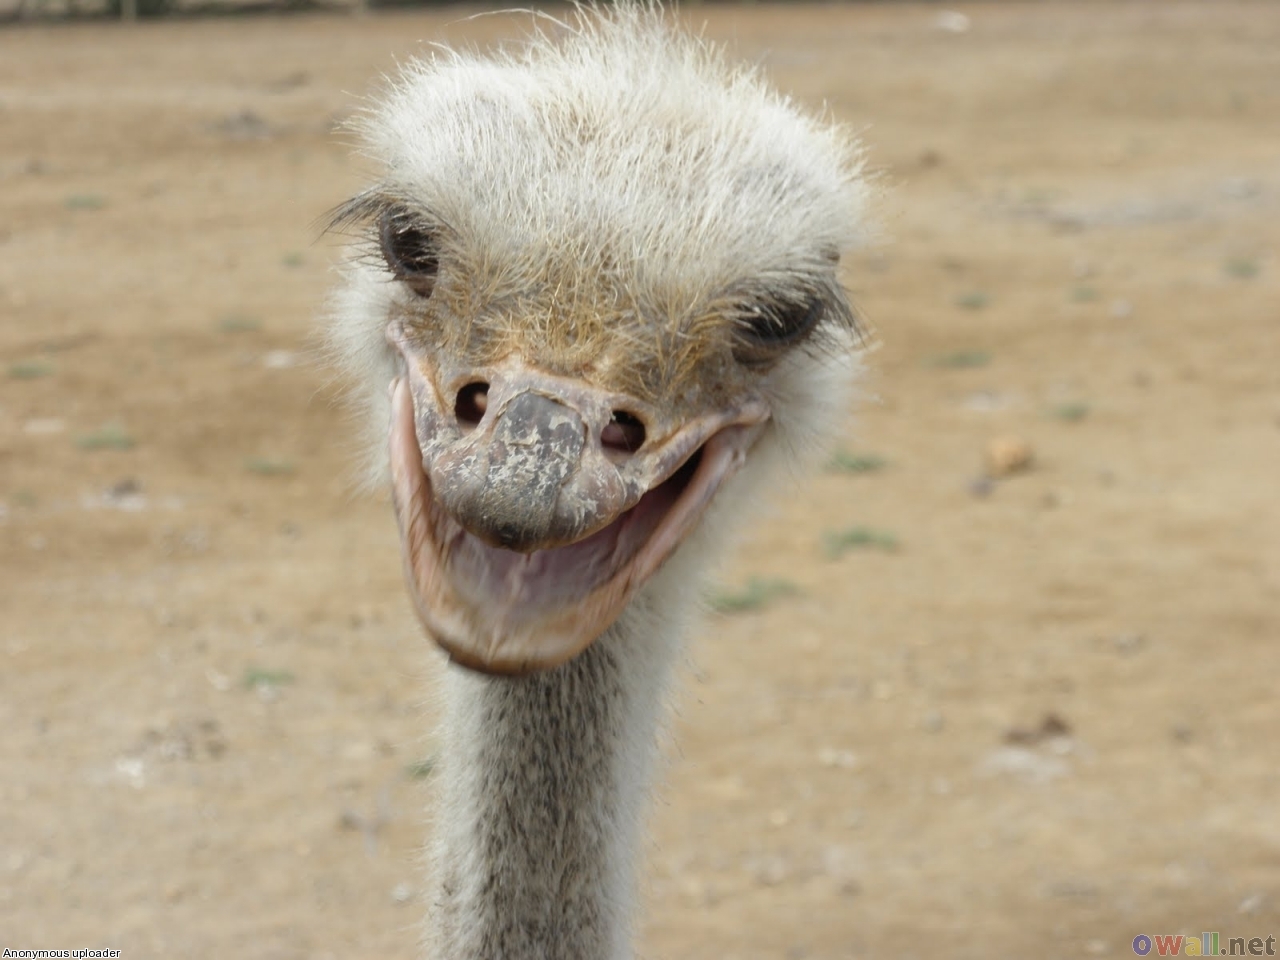 Ostrich Funny Image Quotes. QuotesGram